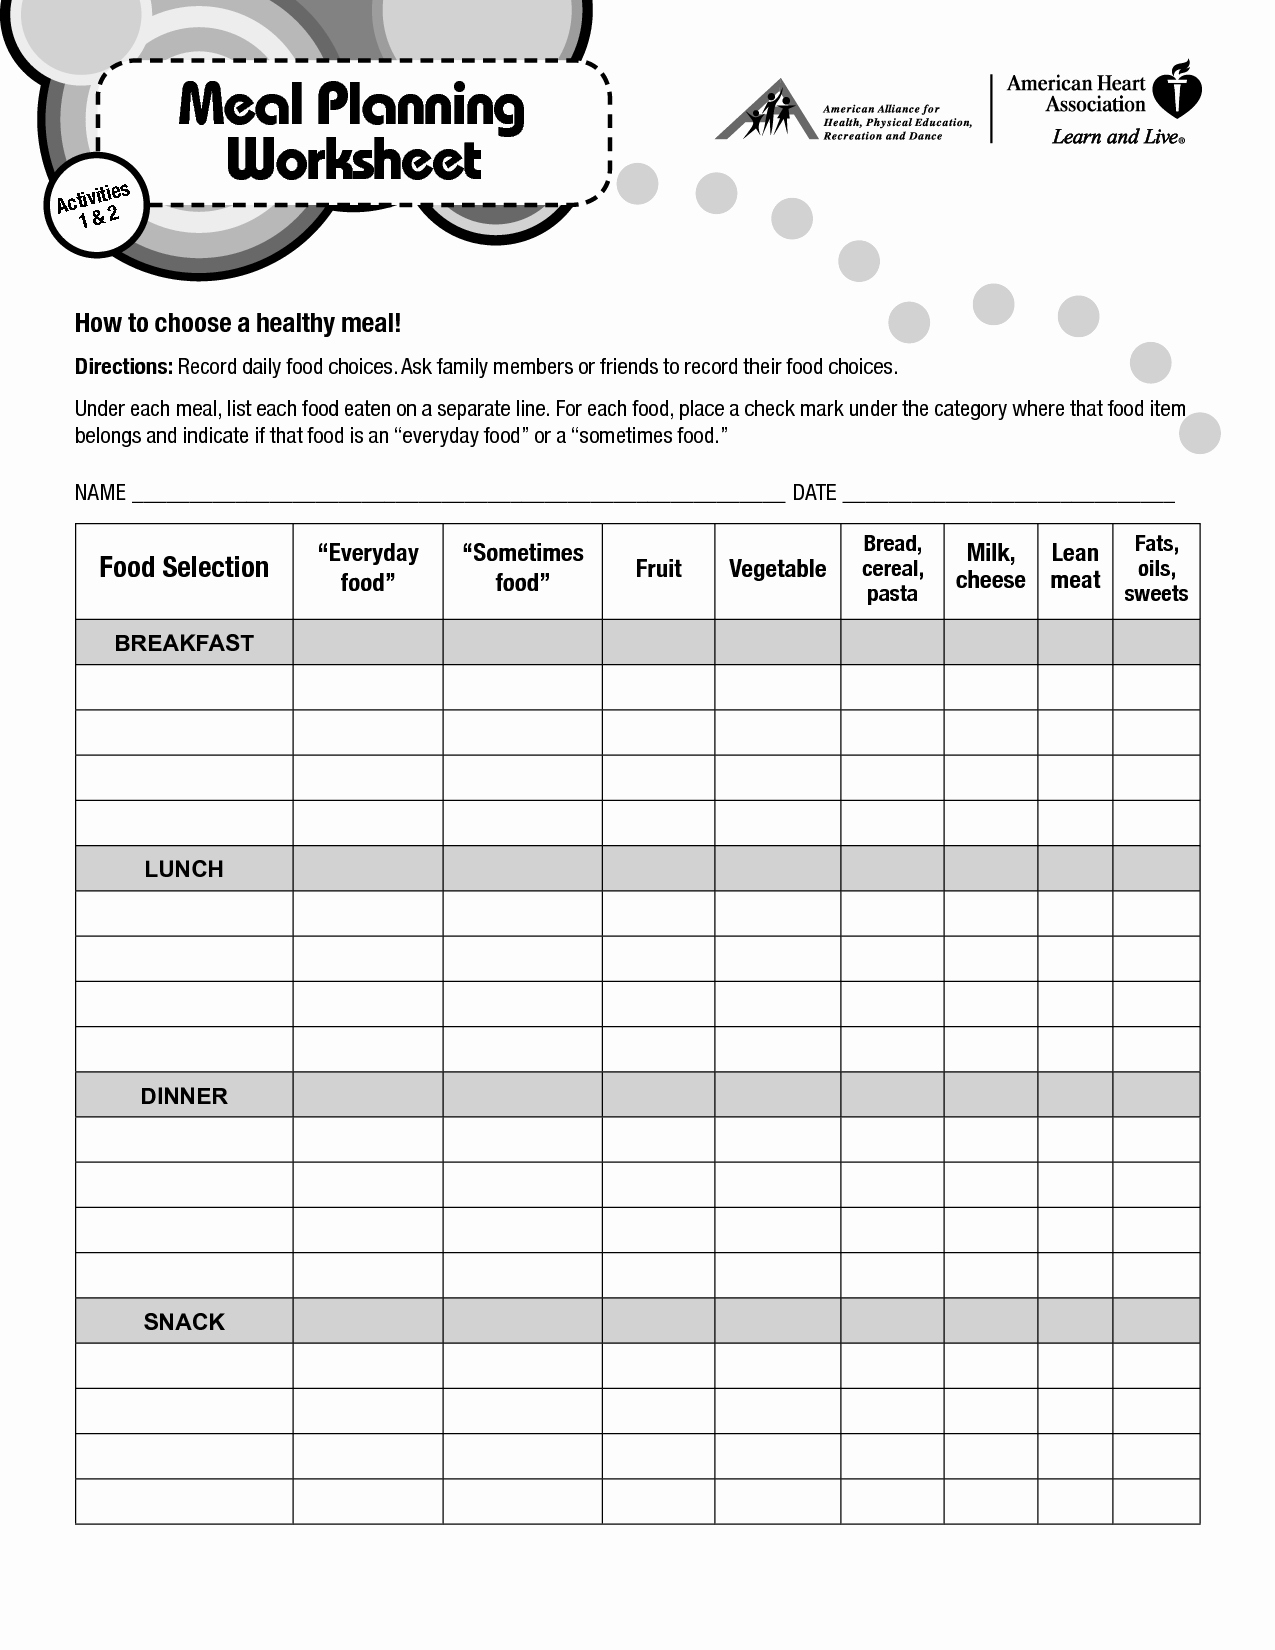 Daily Meal Plan Template Inspirational 19 Best Of Meal Planning Printable Worksheets